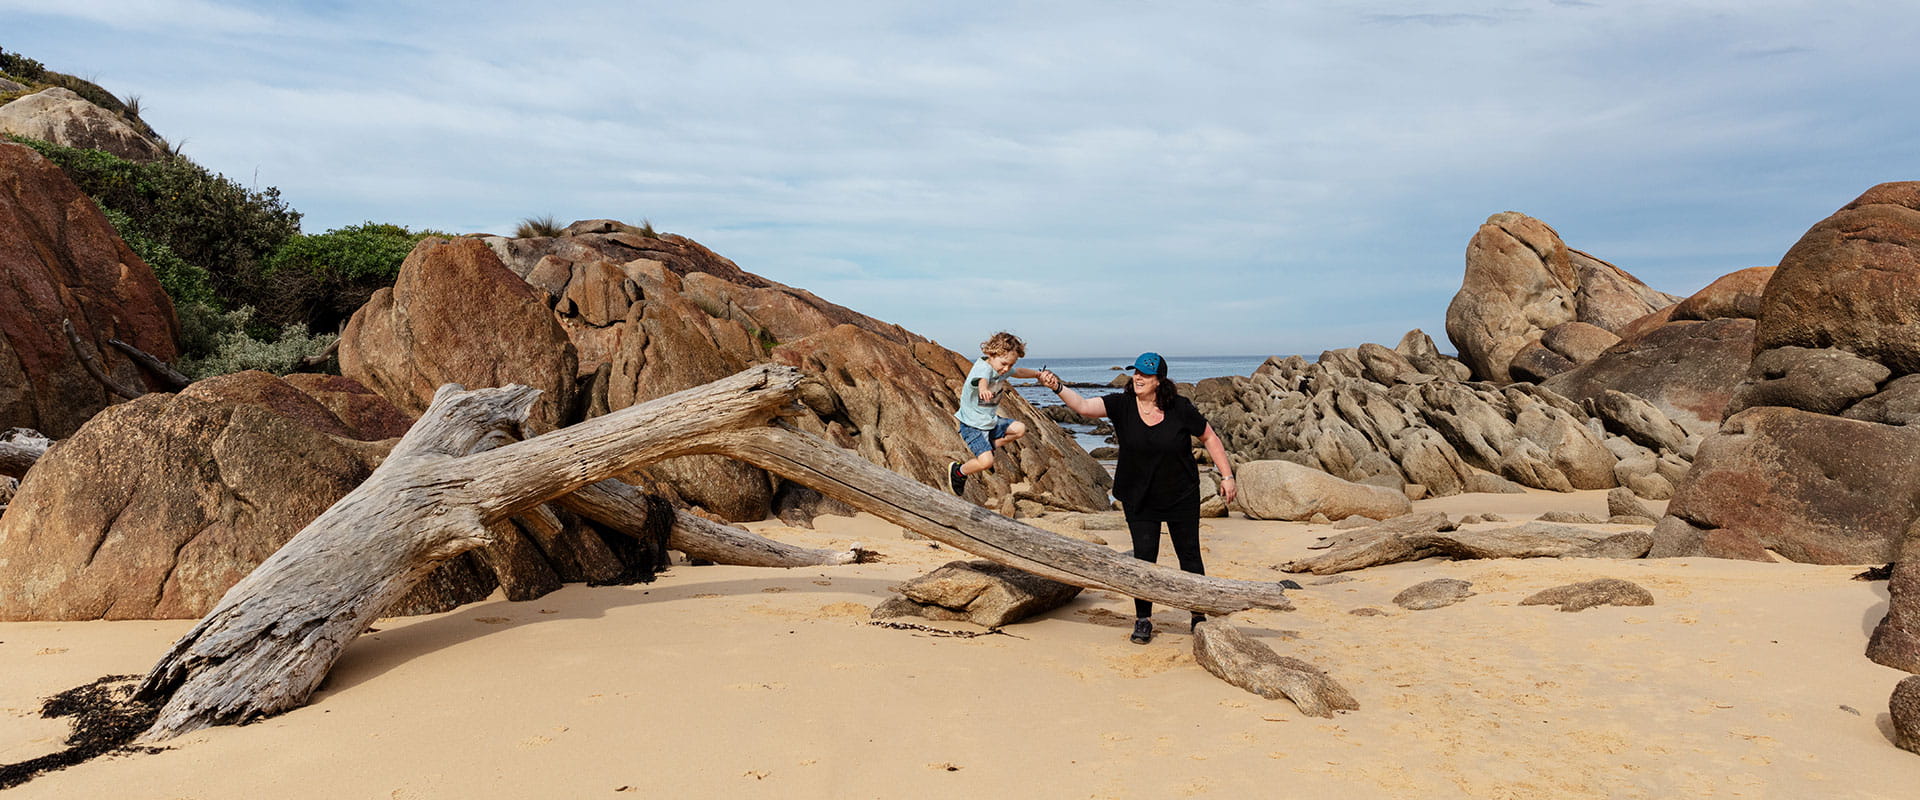 A mother wearing black clothes plays with her toddler son on a big piece of drift wood washed up on a sandy beach in front of some pink granite rocks 